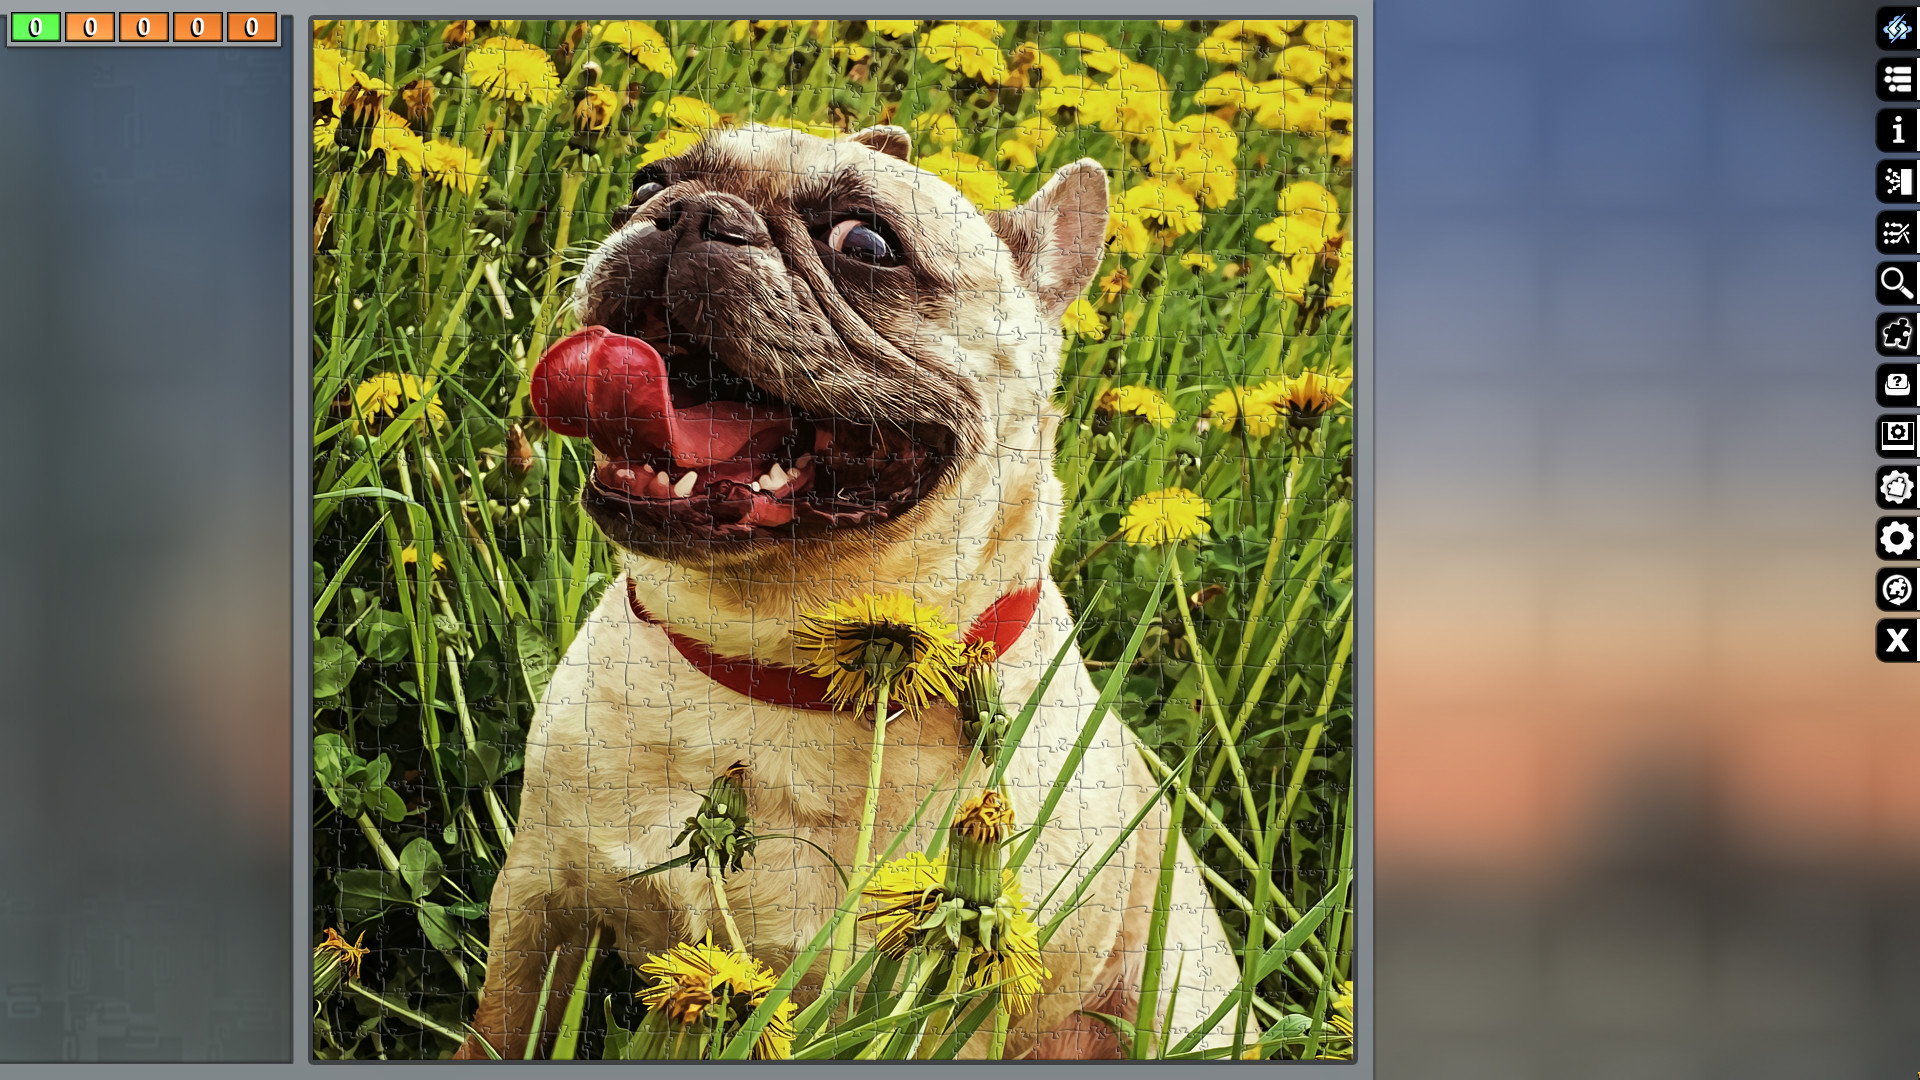 Jigsaw Puzzle Pack - Pixel Puzzles Ultimate: Dogs screenshot